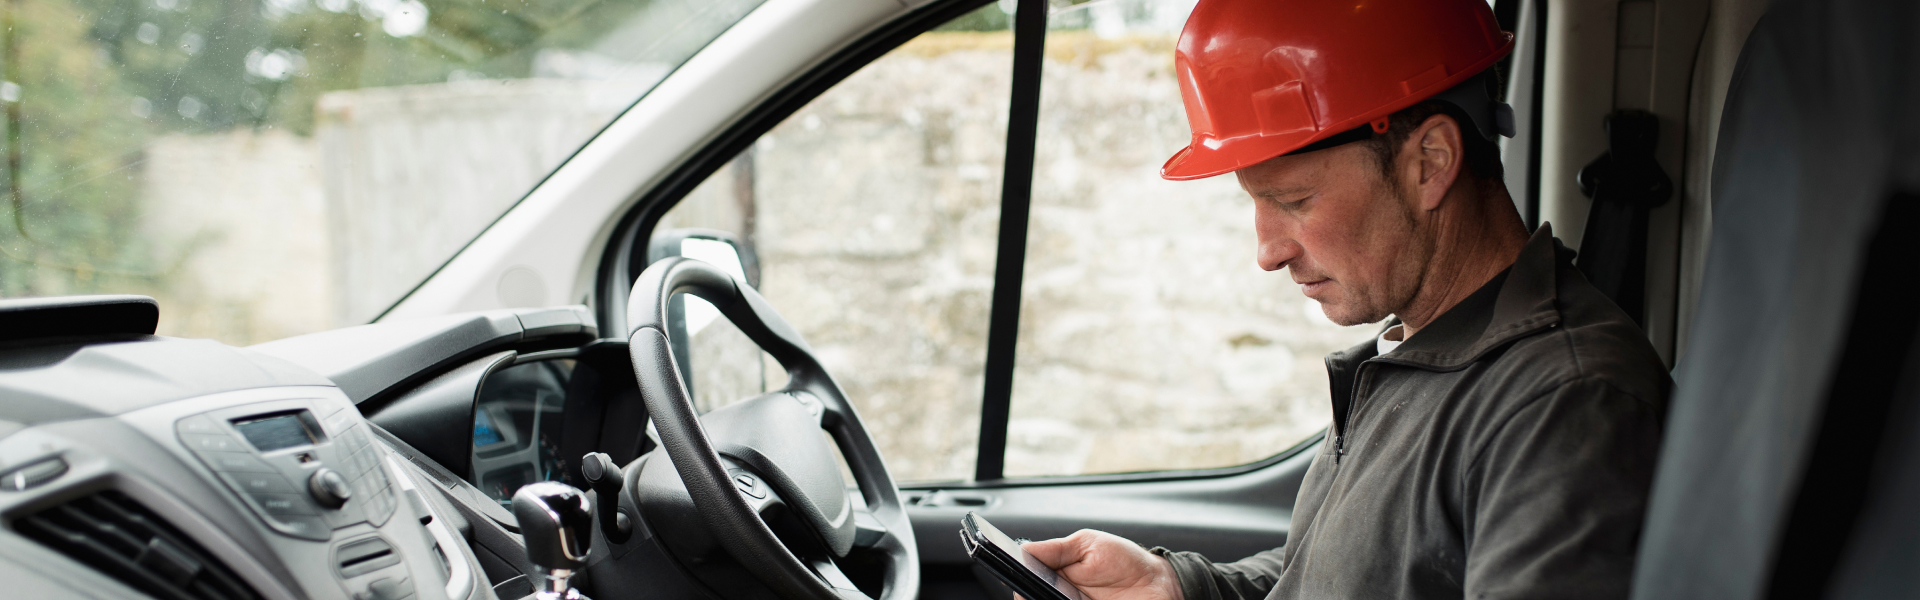 A man wearing hard hat is checking his phone in his work van.